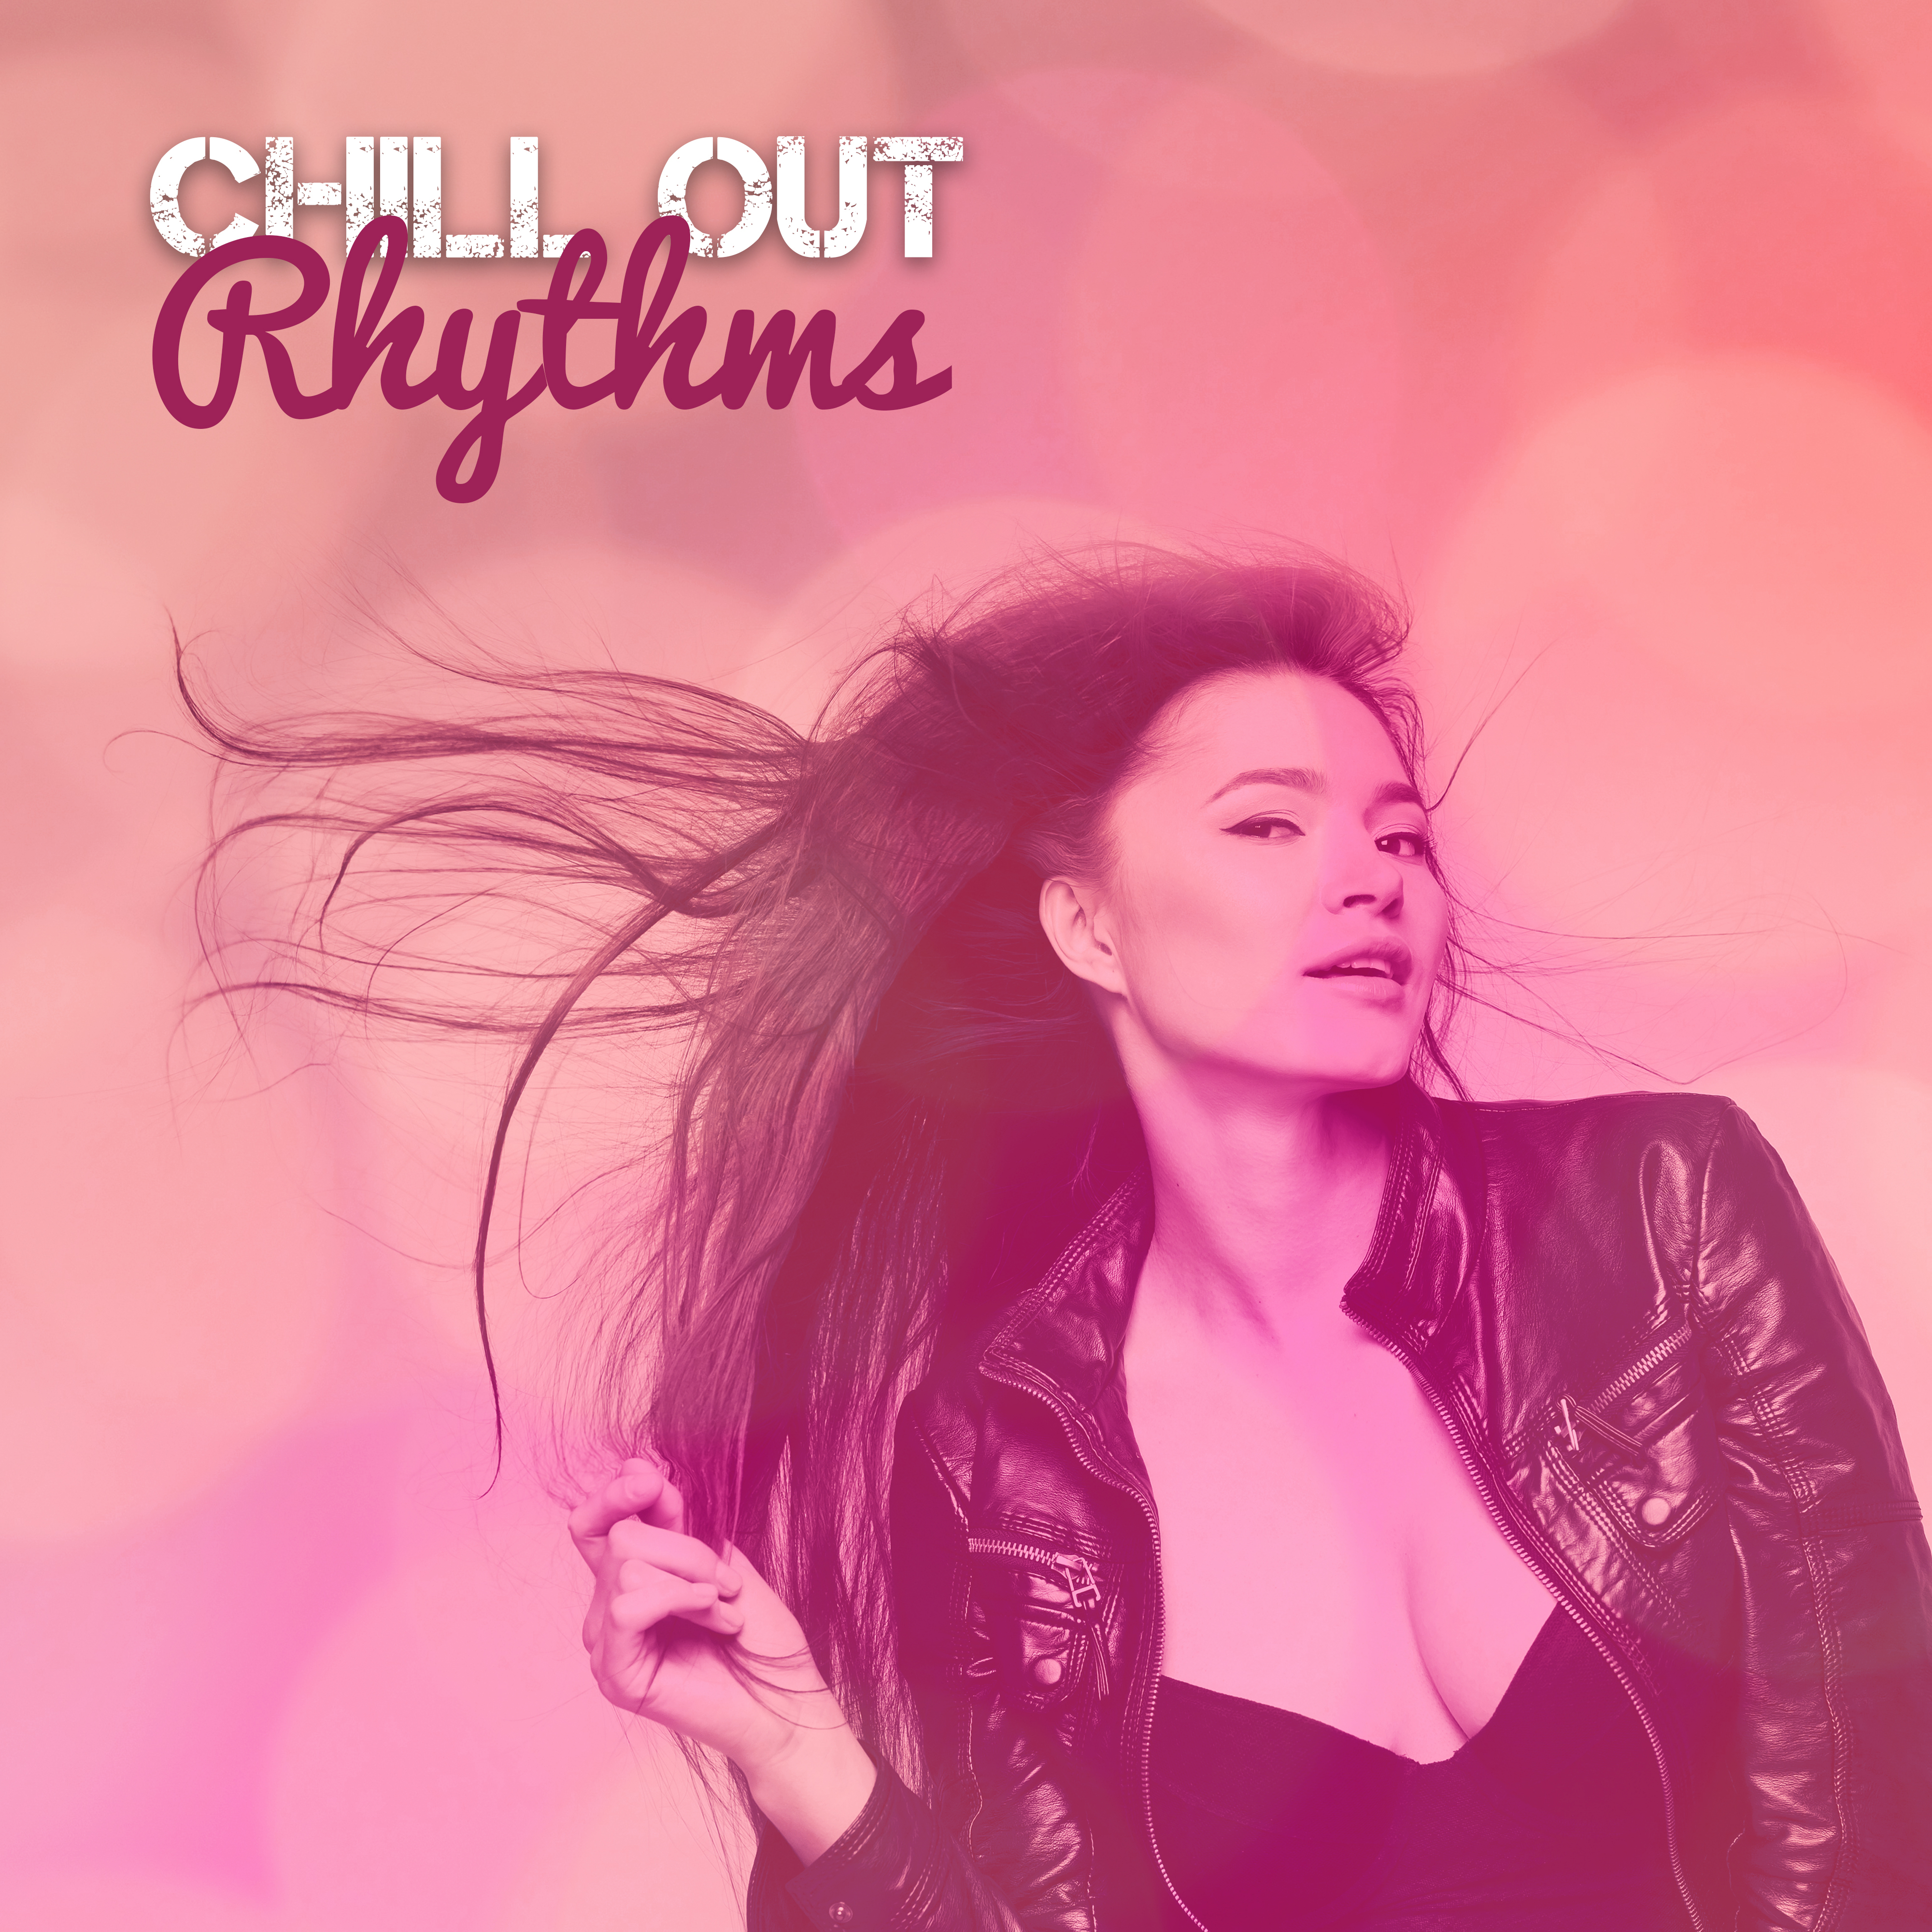 Chill Out Rhythms – Best Summer Music, Holiday 2017, Party Time, Ibiza Sounds